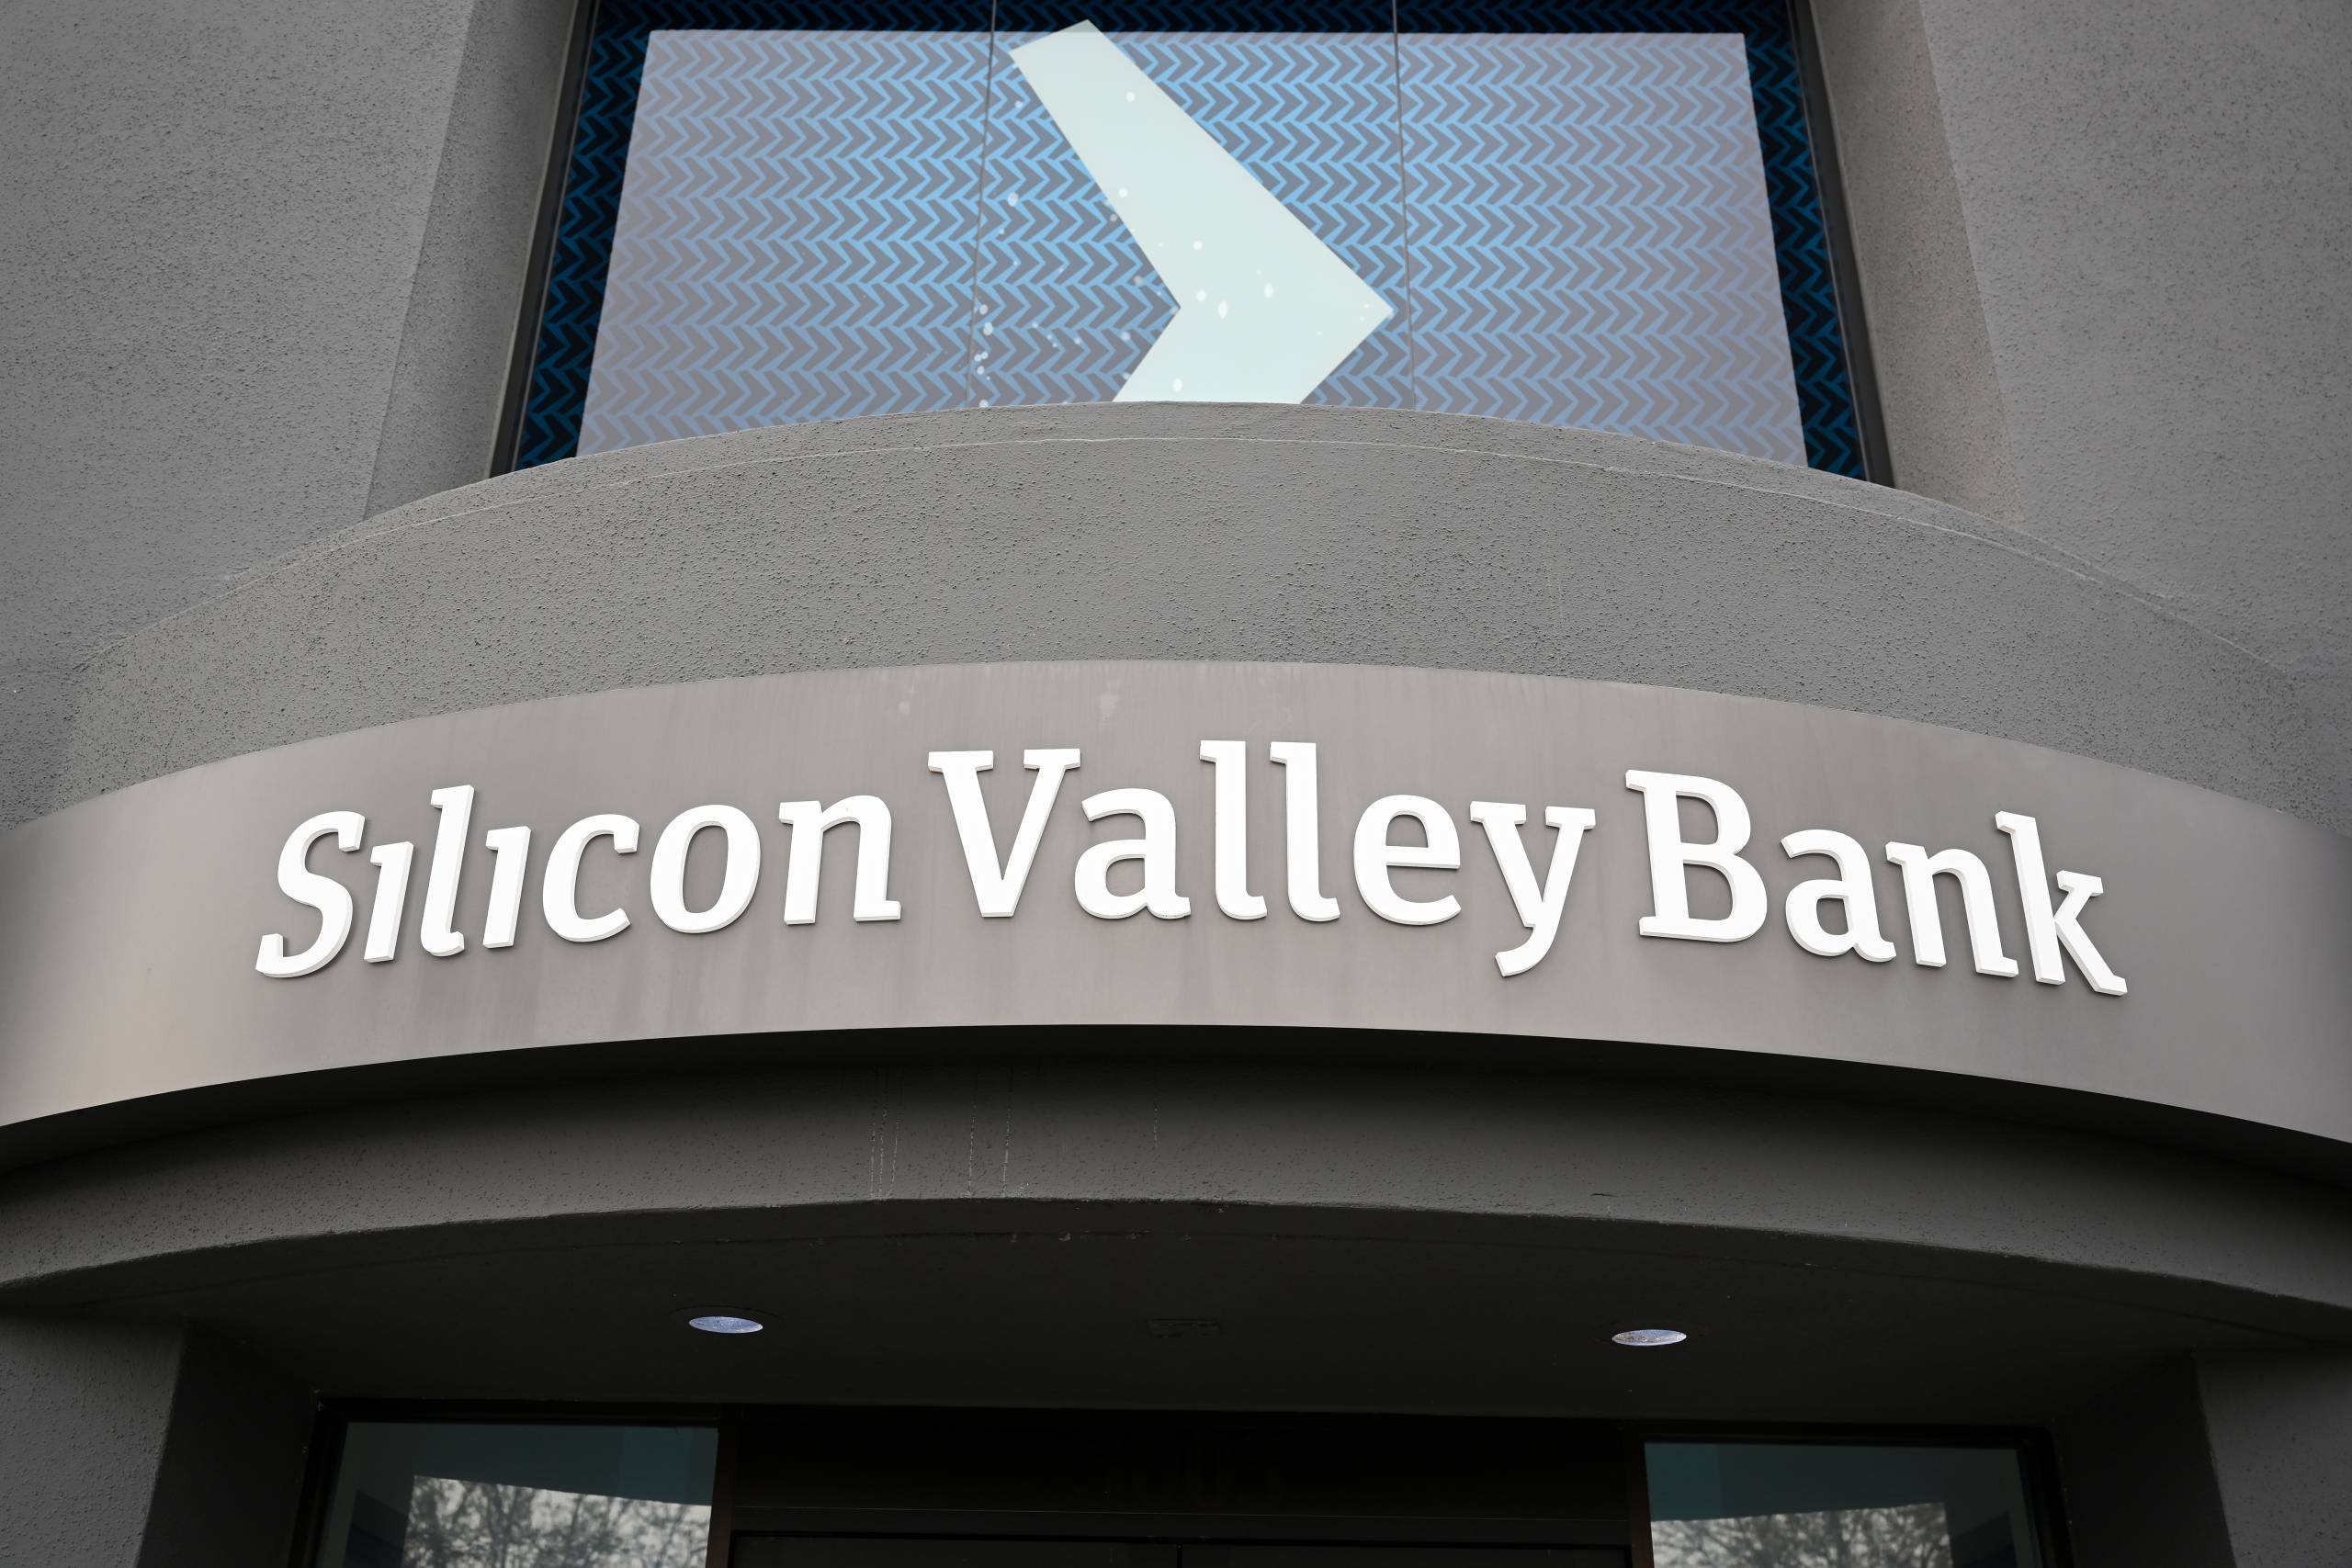 The exterior signage of Silicon Valley Bank with white letters on a gray building.